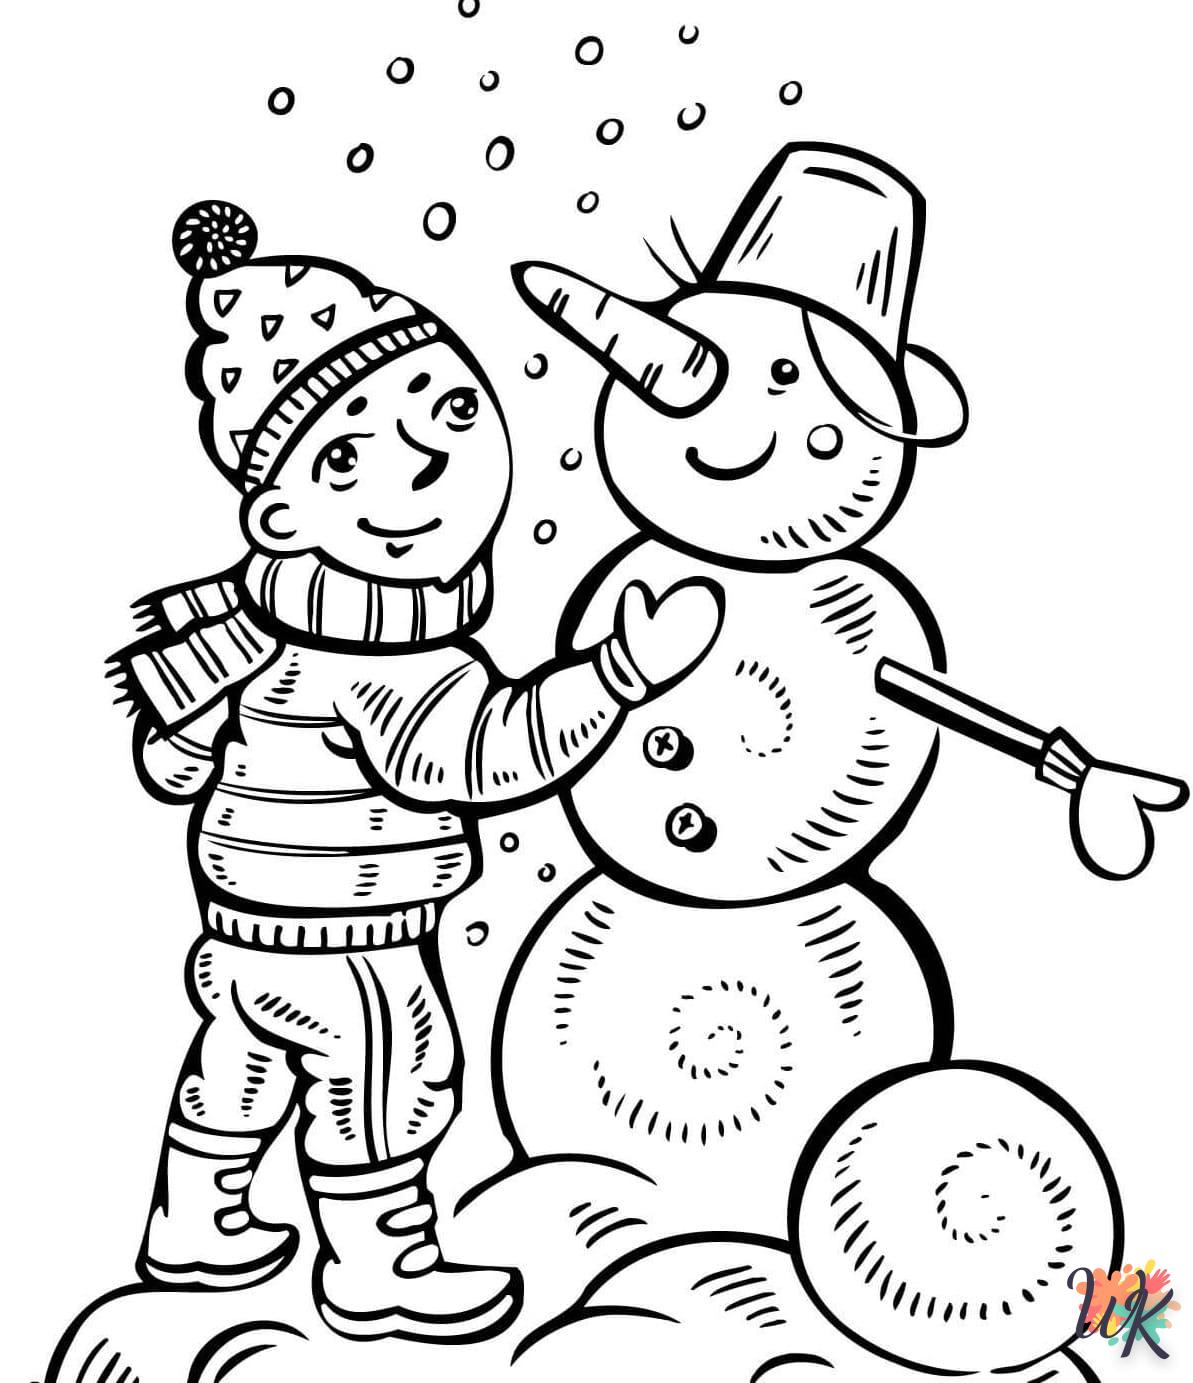 Snowman coloring for 7 year olds